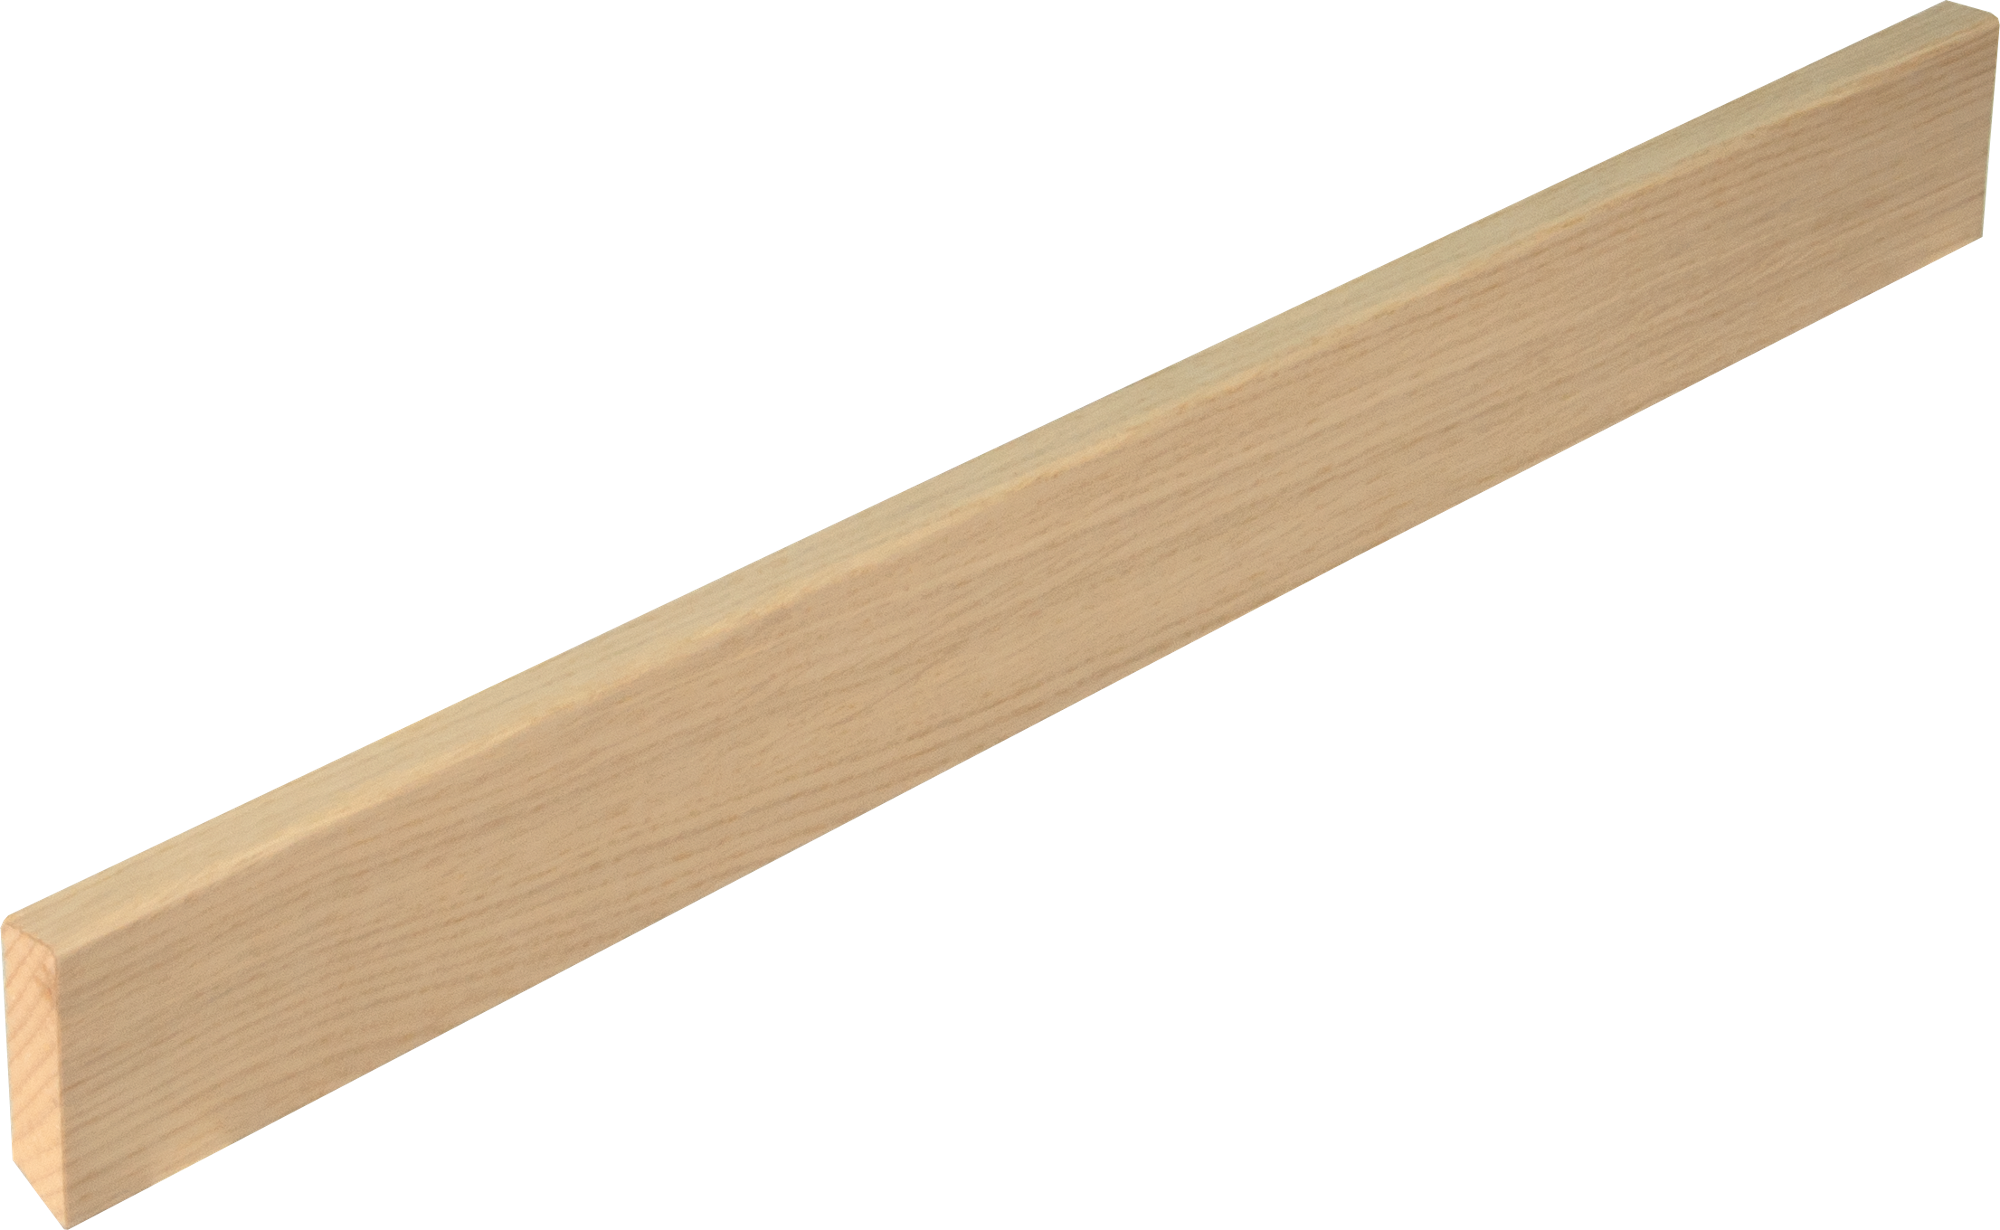 Skirtings veneered, Oak, white
16x58x2700mm
matching Live Natural white oiled surfaces